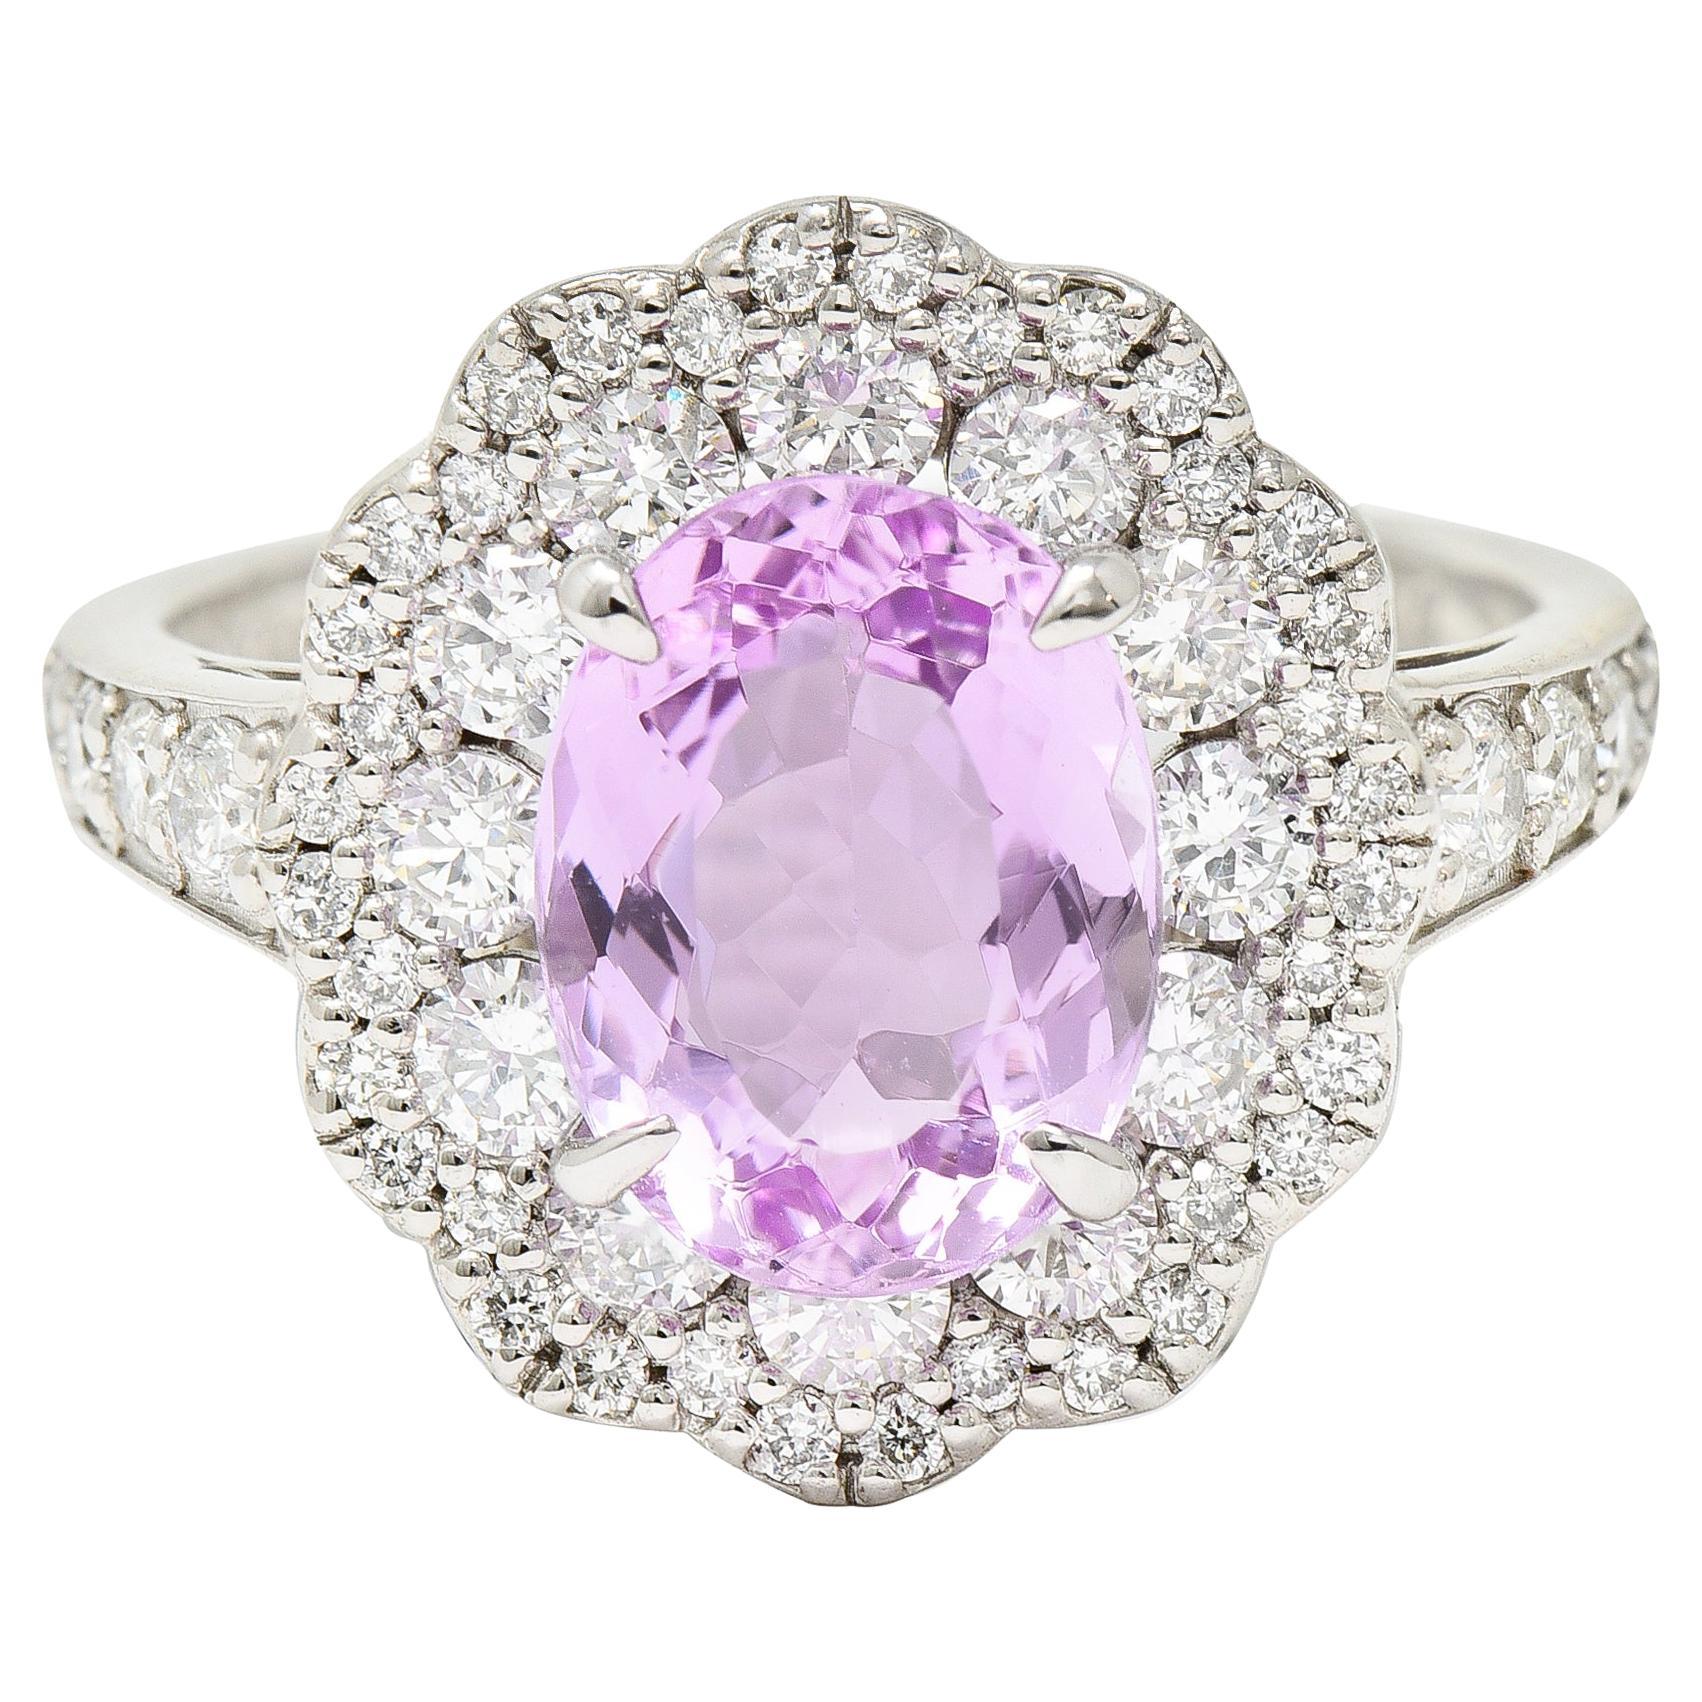 Contemporary 3.88 Carats Pink Topaz Diamond Platinum Floral Cluster Ring For Sale